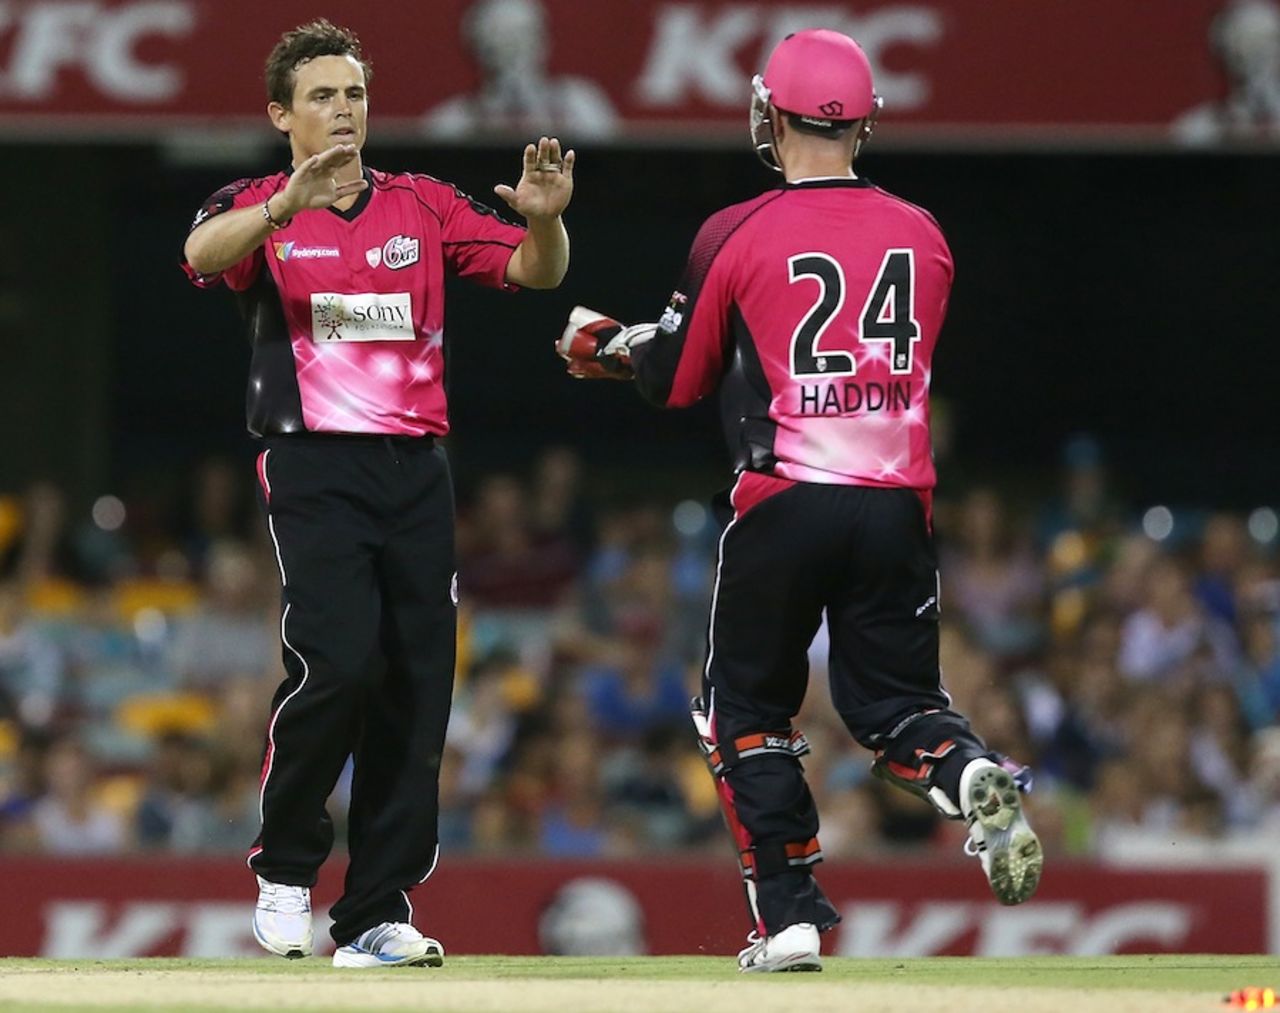 Steve O'Keefe is congratulated after picking up a wicket, Brisbane Heat v Sydney Sixers, Big Bash League, Gabba, January 7, 2013